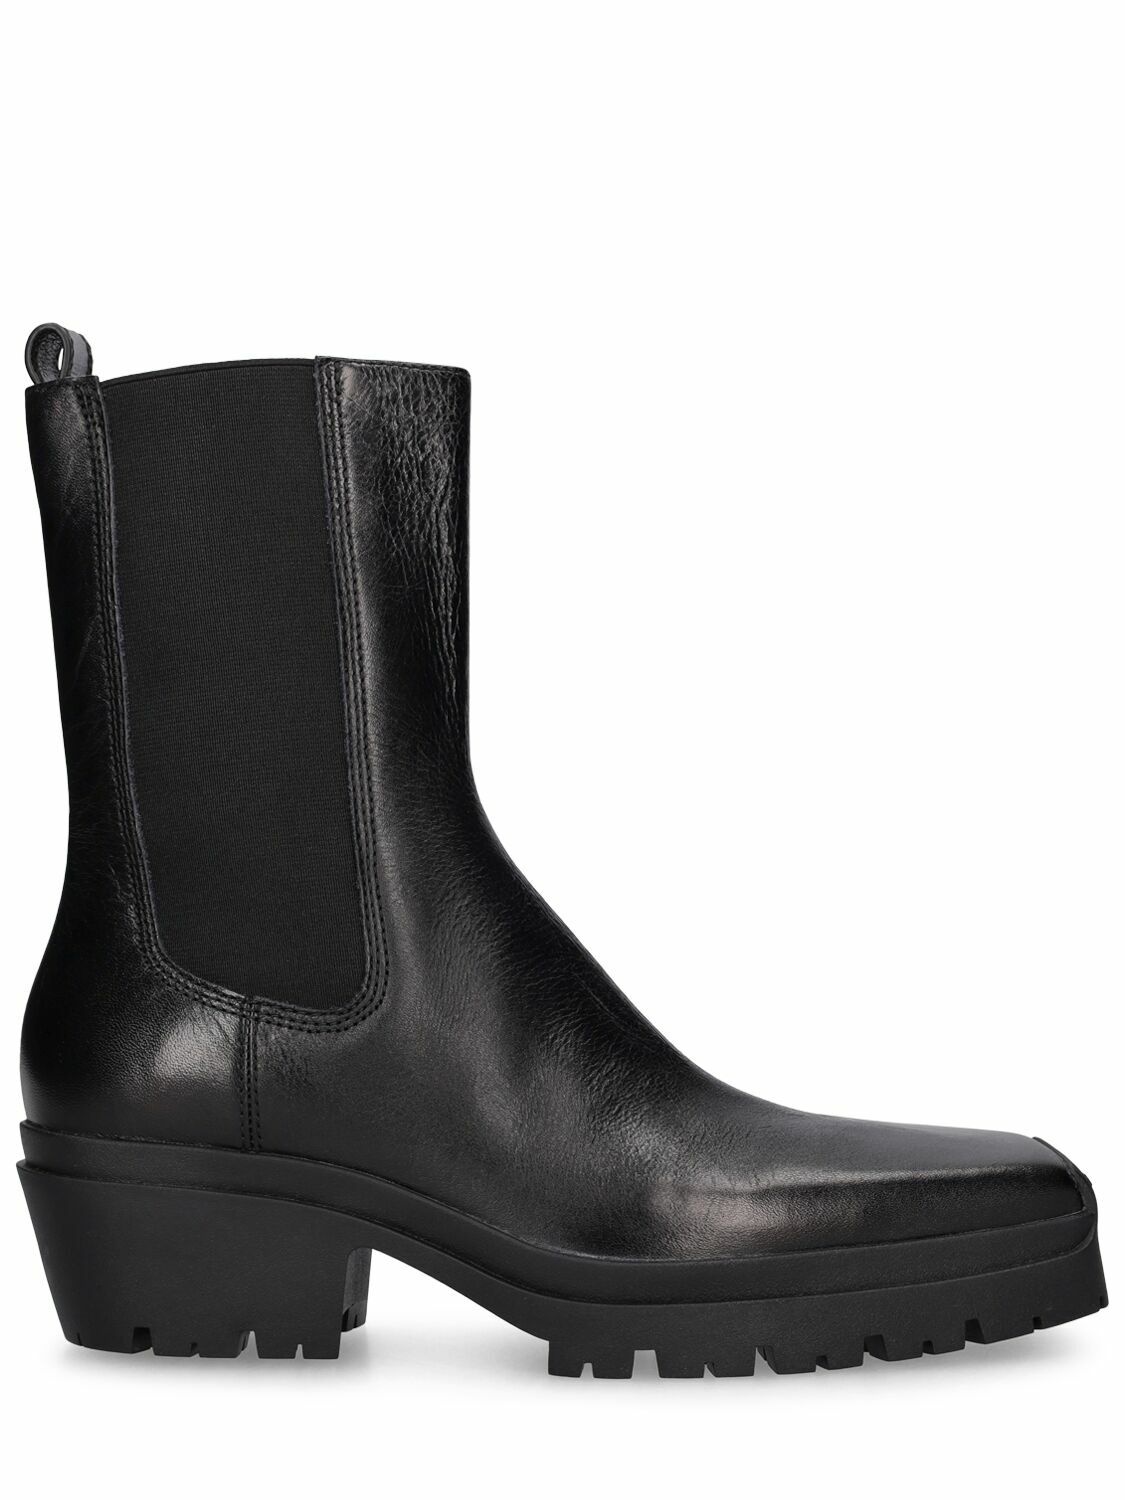 Photo: ALEXANDER WANG - 45mm Terrain Crackled Leather Ankle Boot